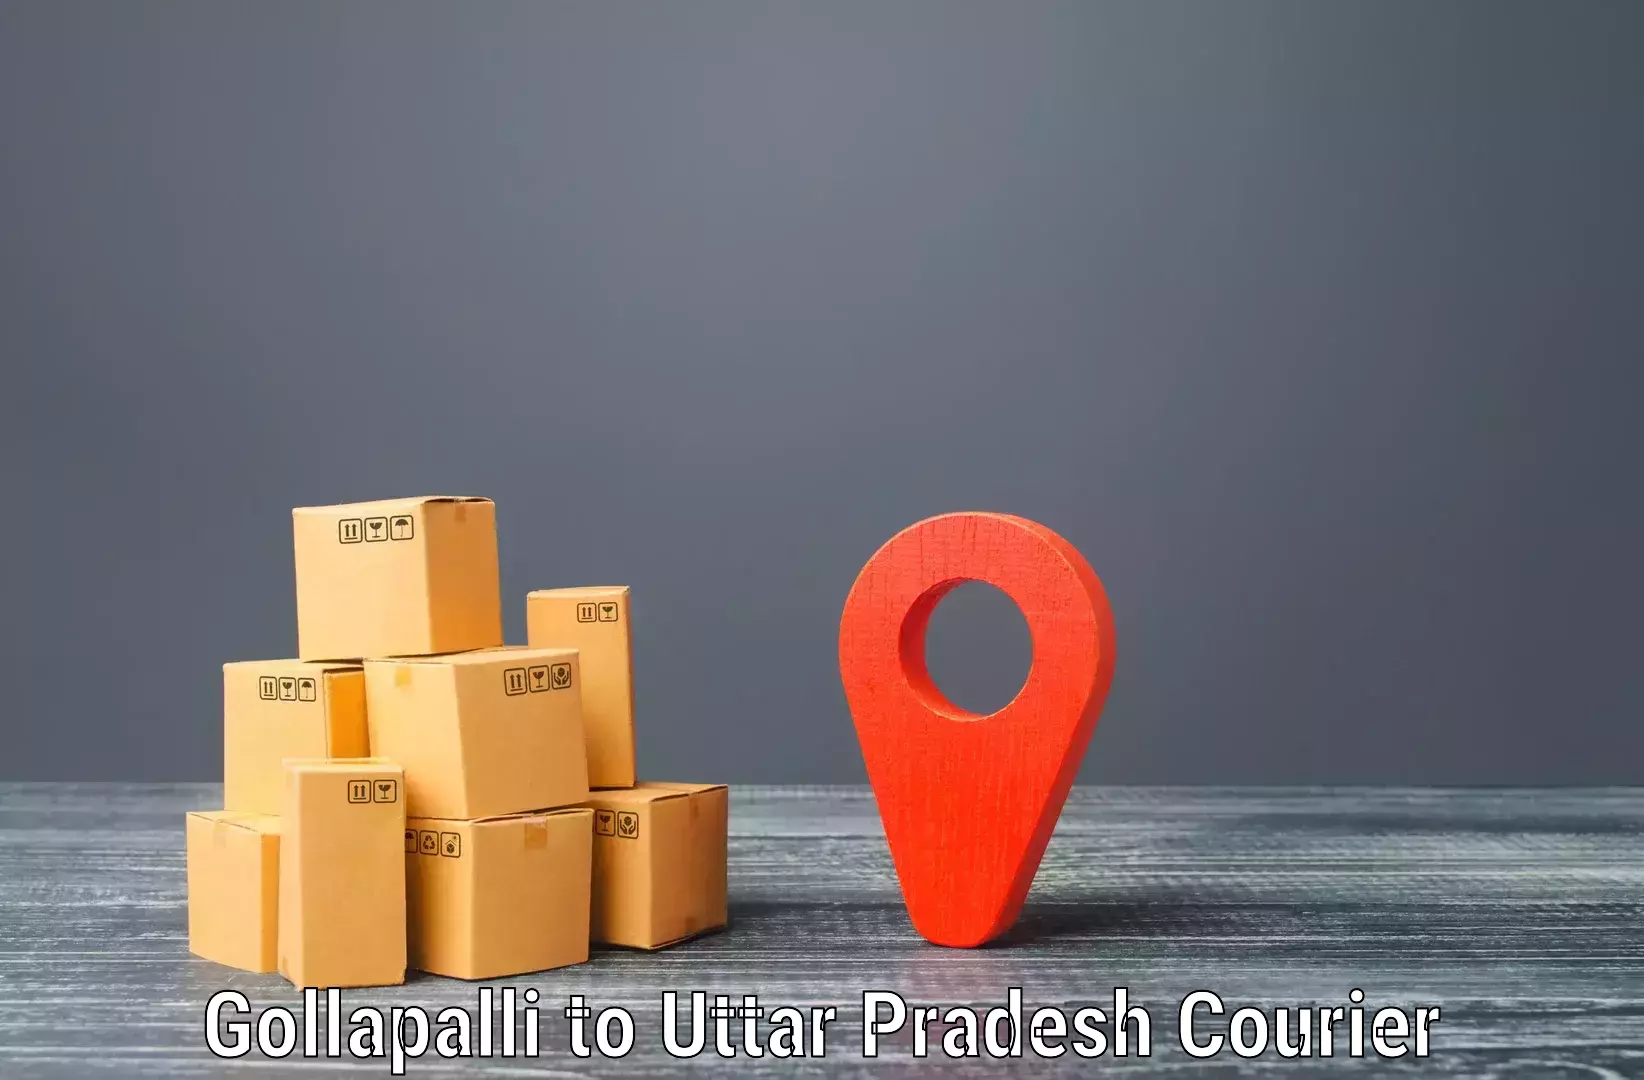 Comprehensive logistics solutions Gollapalli to Kanpur